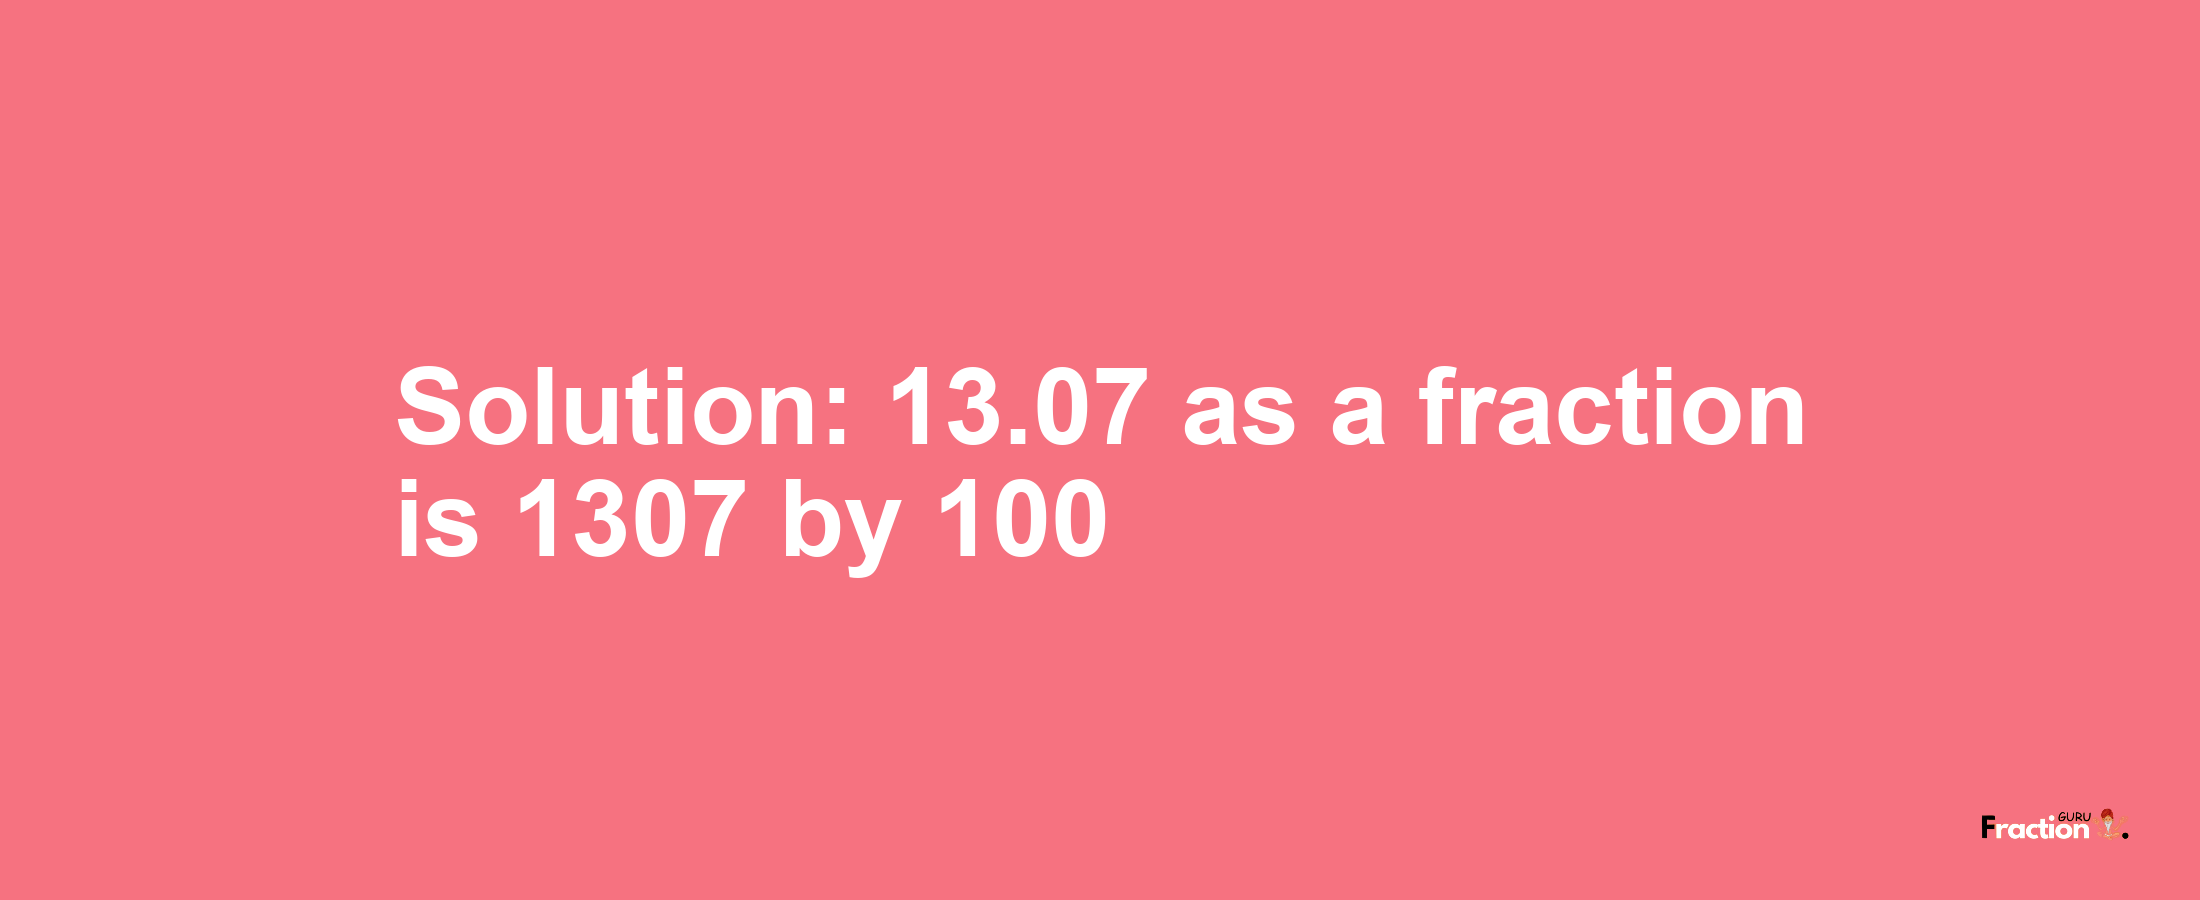 Solution:13.07 as a fraction is 1307/100